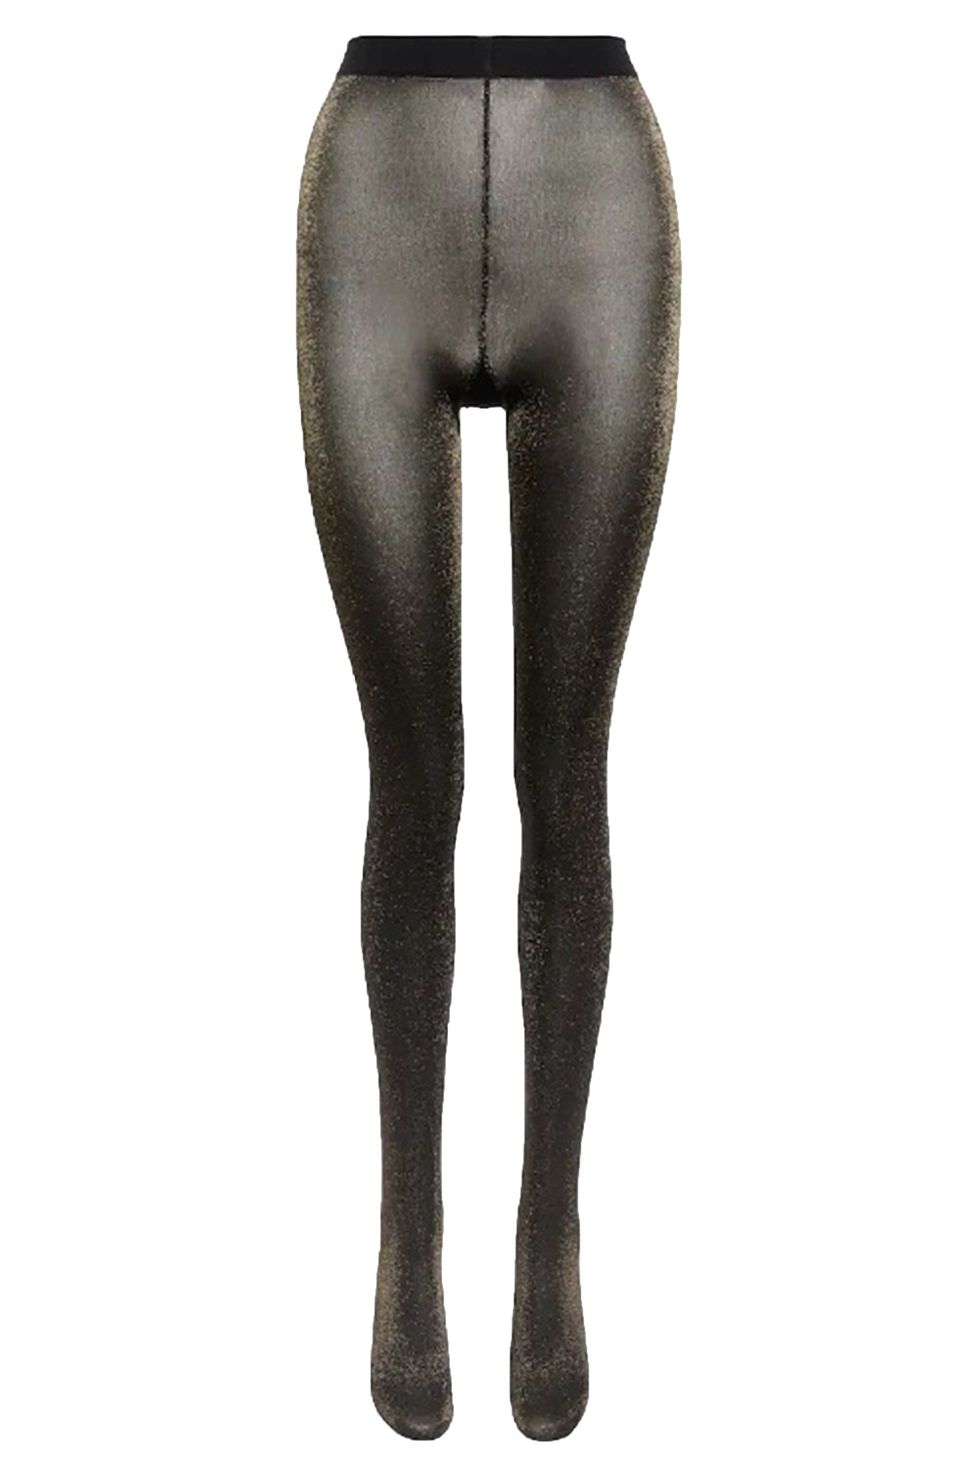 Wolford glittery tights